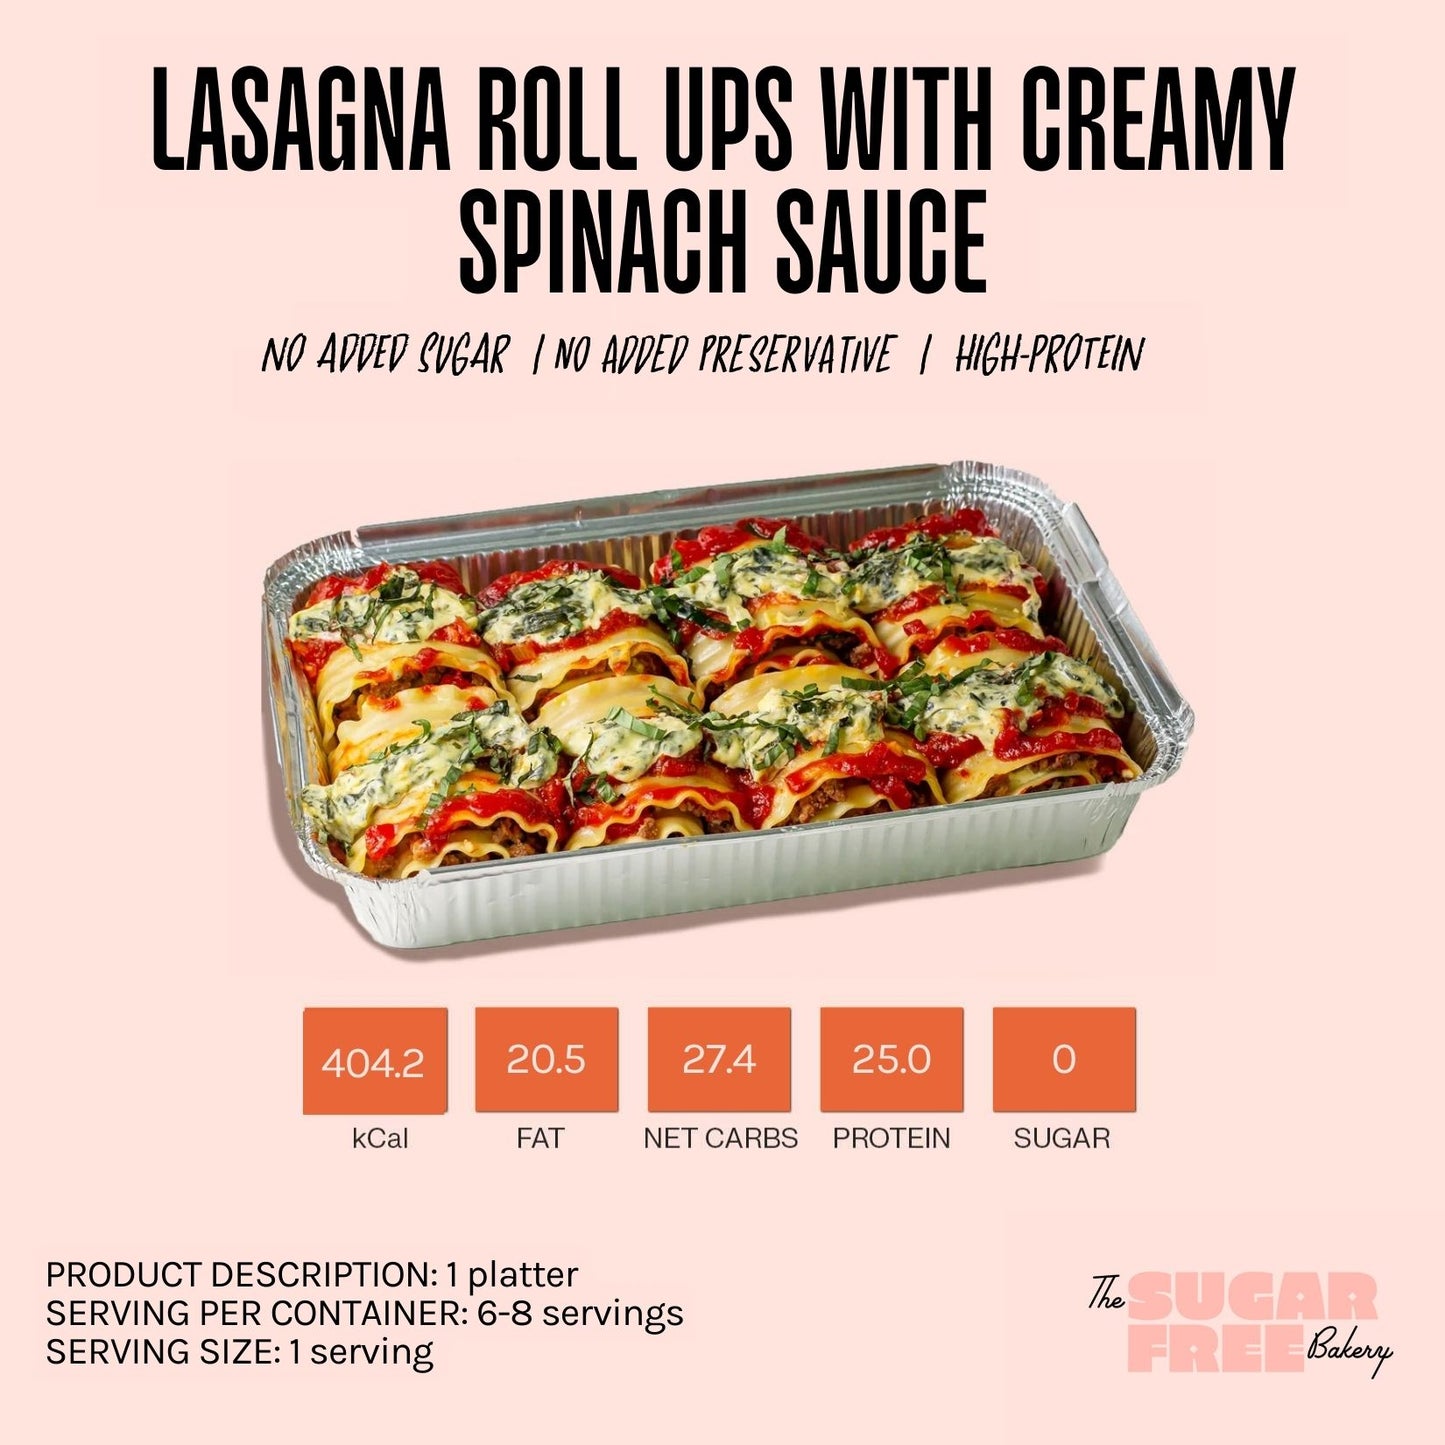 Lasagna Roll Ups with Creamy Spinach Sauce